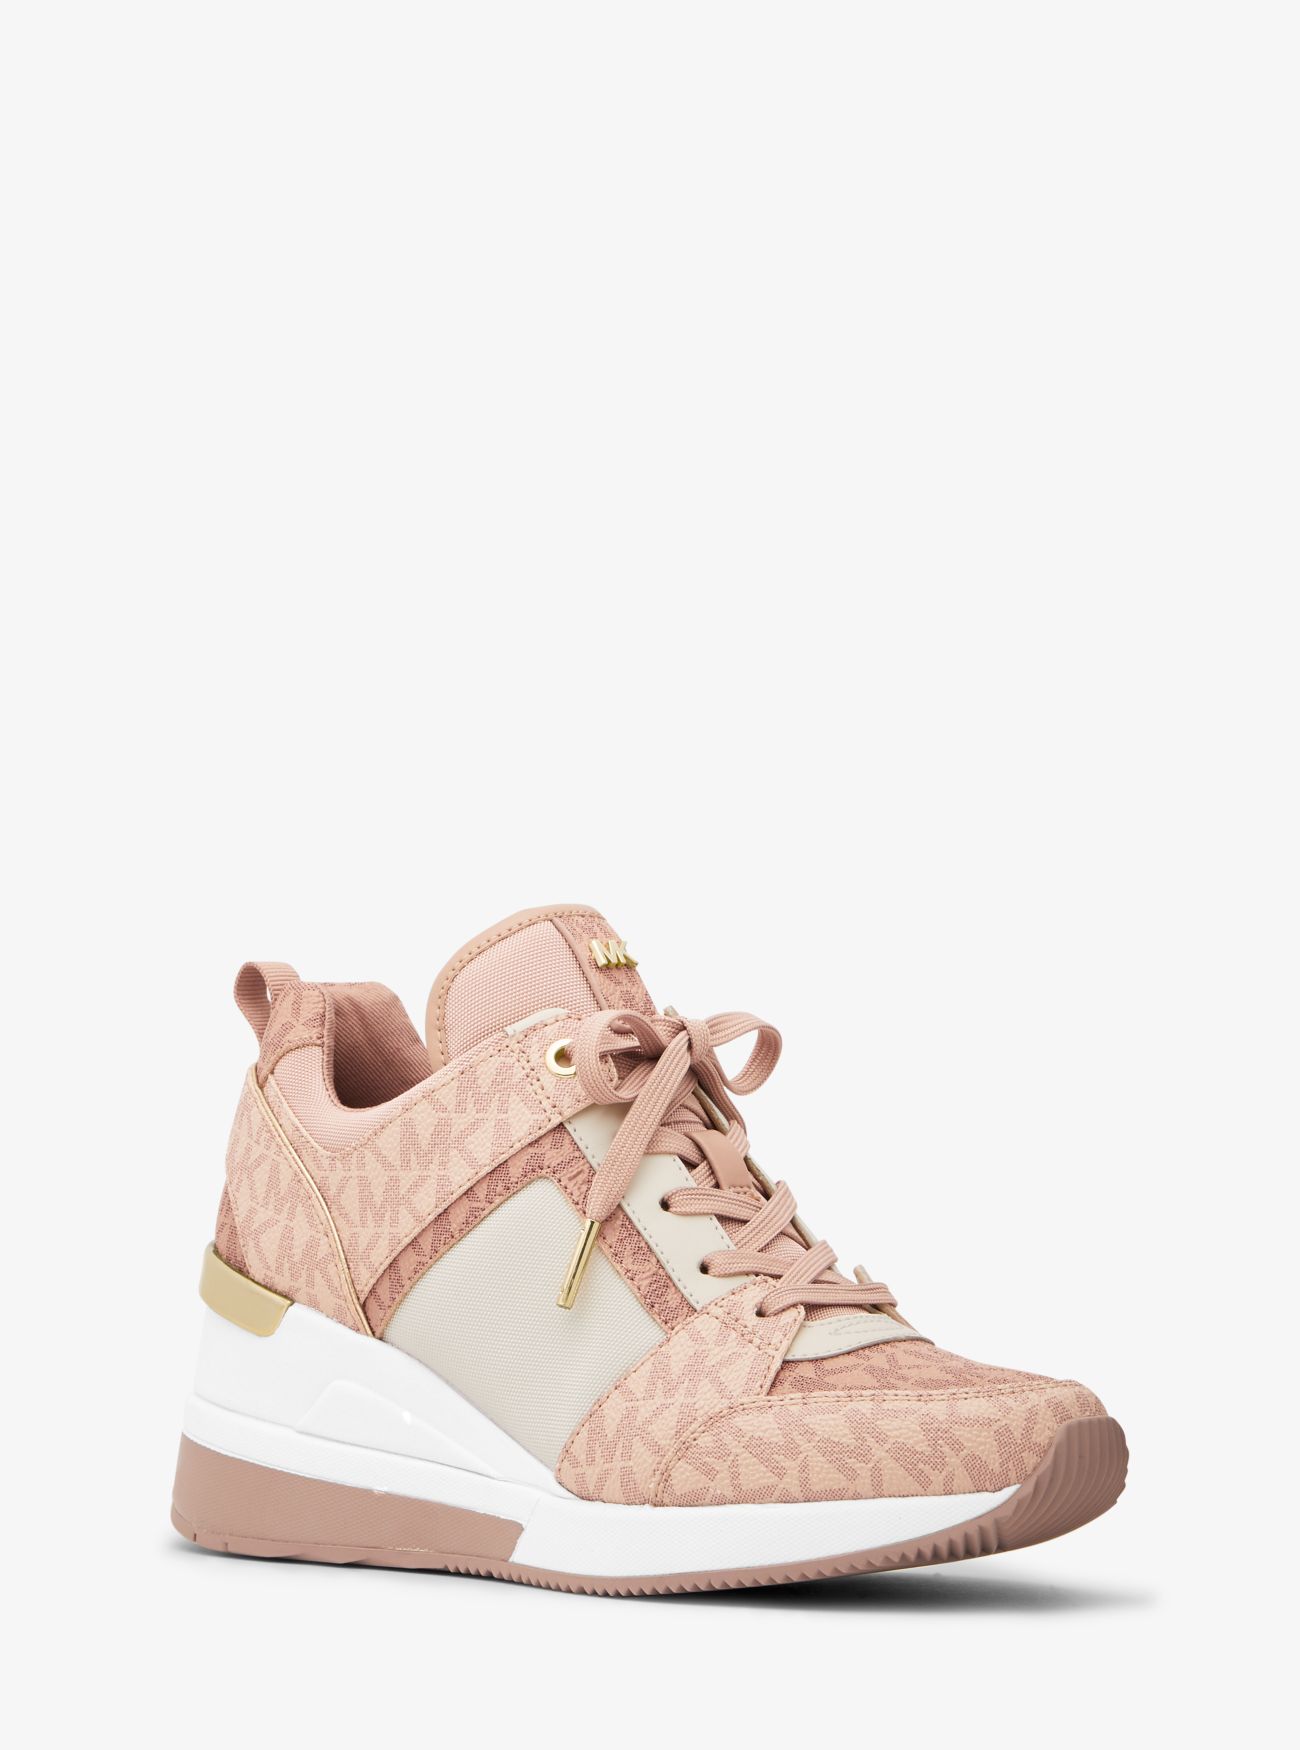 MK Georgie Color-Block Logo and Leather Trainer - Fawn Multi - Michael Kors